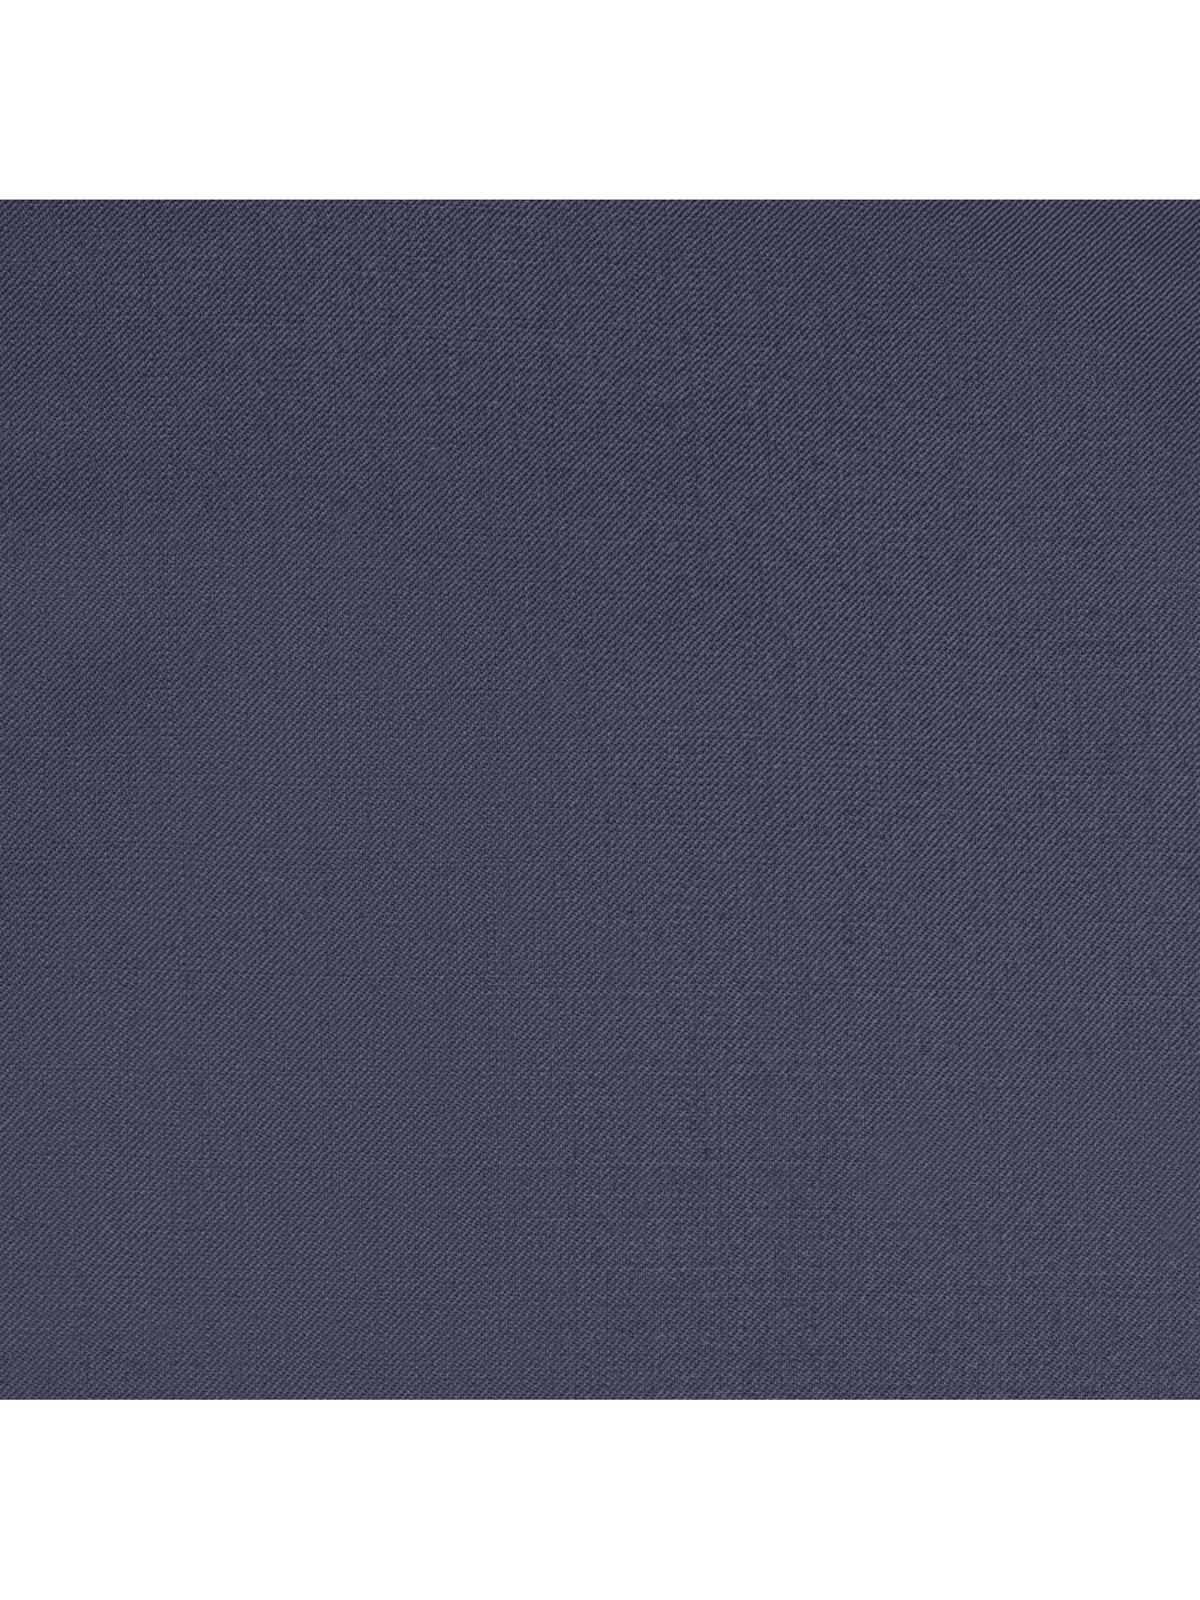 close up of navy blue 100% wool suit fabric